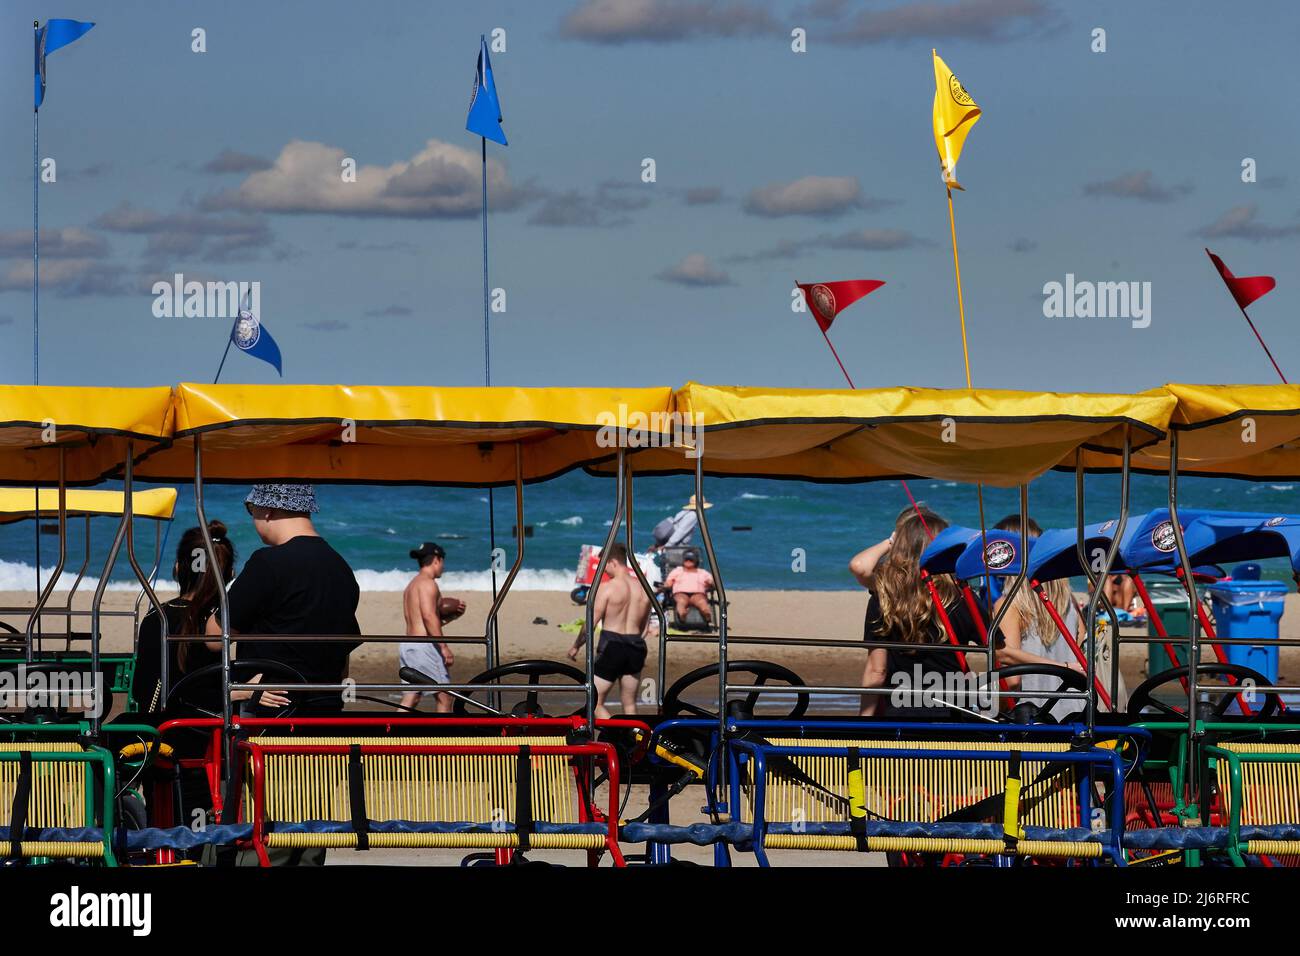 parked paddle cars and people enjoying the Chicago lakefront on a warm day Stock Photo